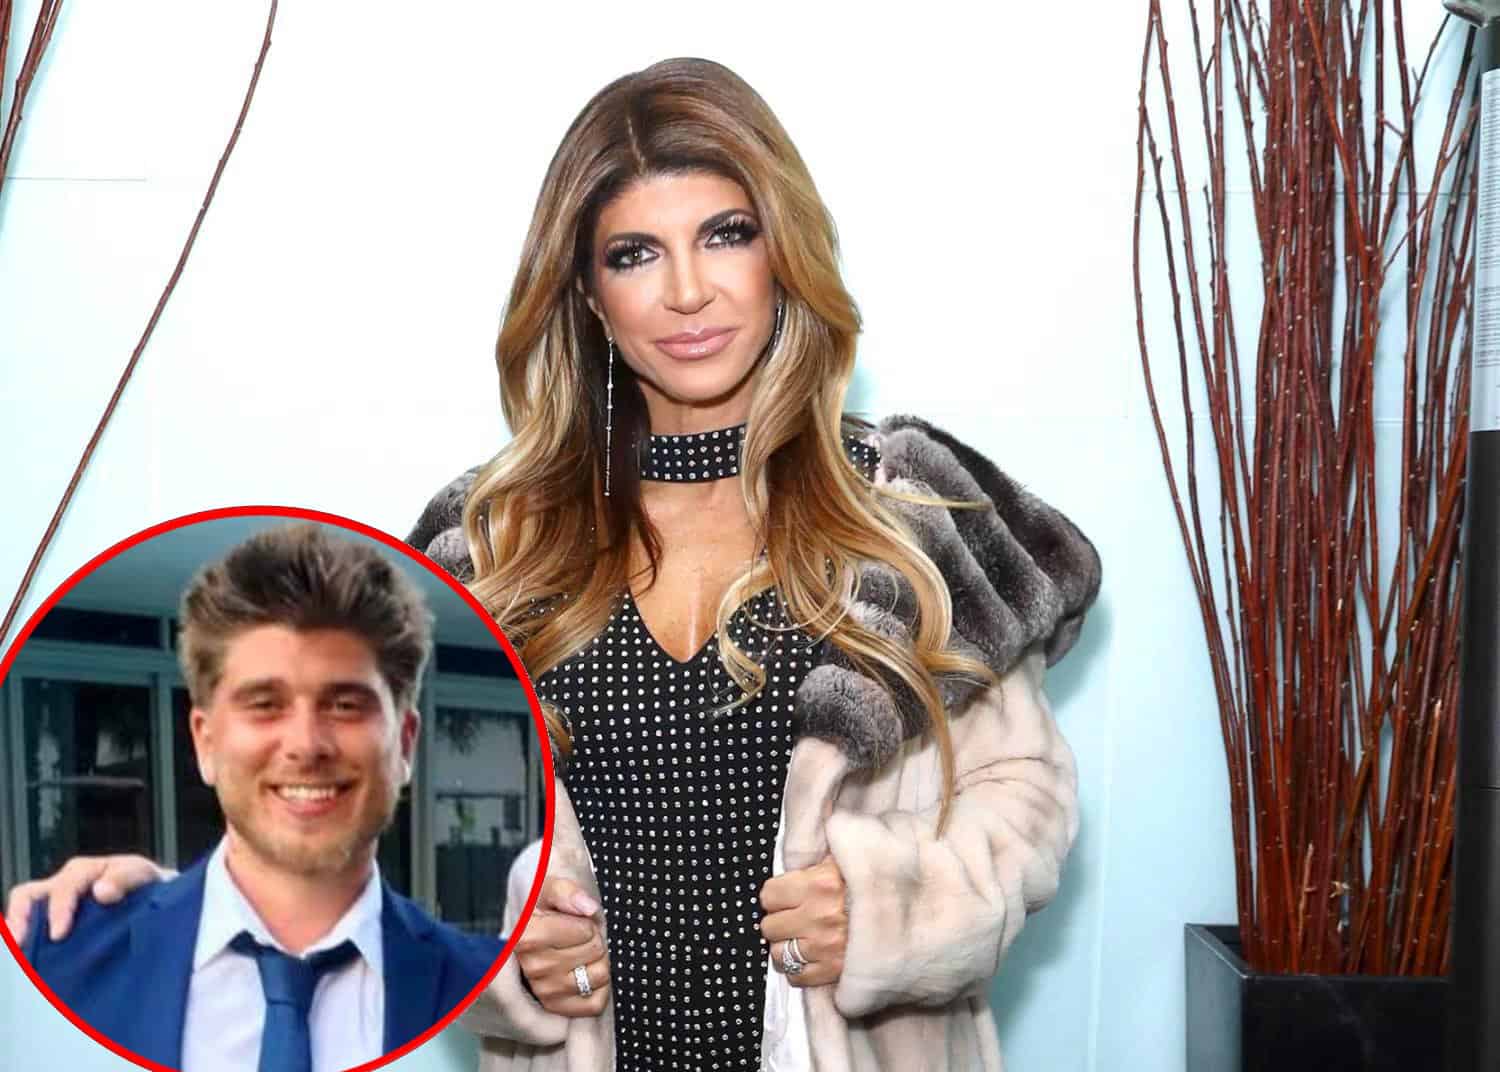 RHONJ's Teresa Giudice Caught Partying With 'Boy Toy' Blake Schreck for Third Time In Miami